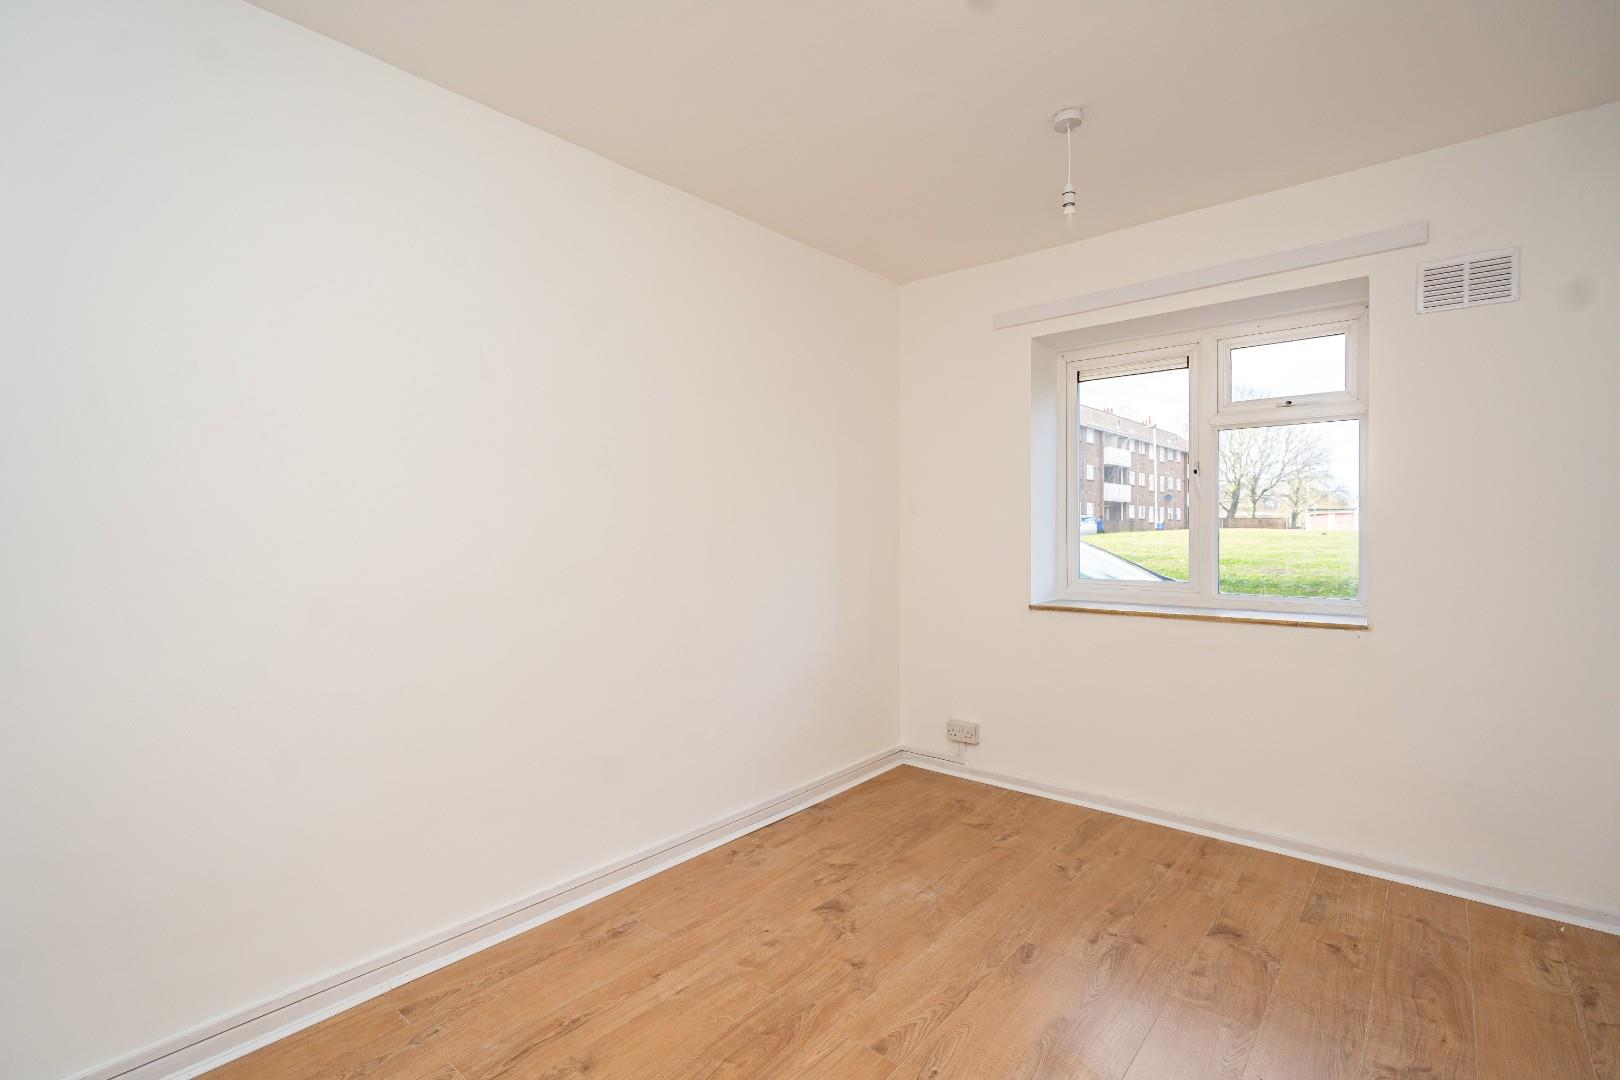 Property image for Willenhall Road, Wolverhampton